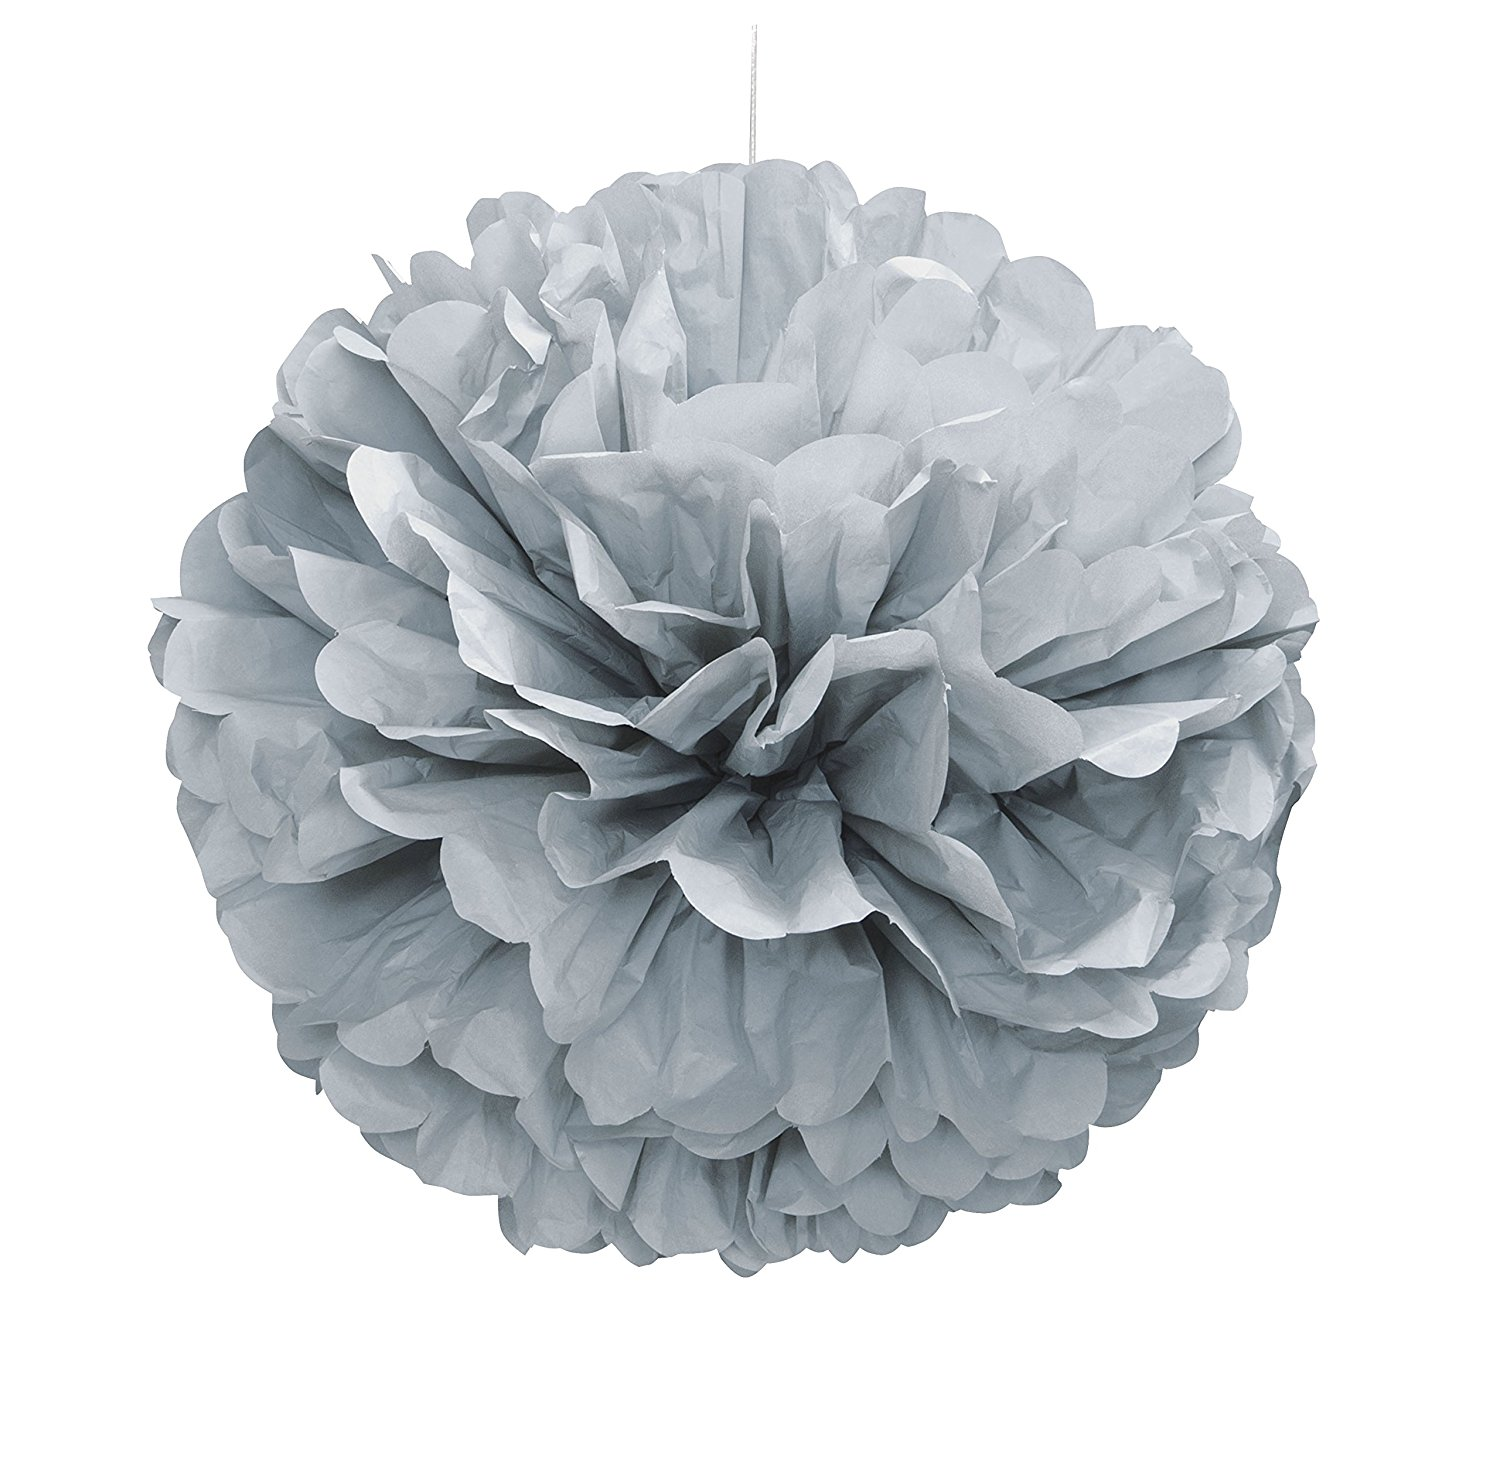 Silver Tissue Puff Decorations 16"